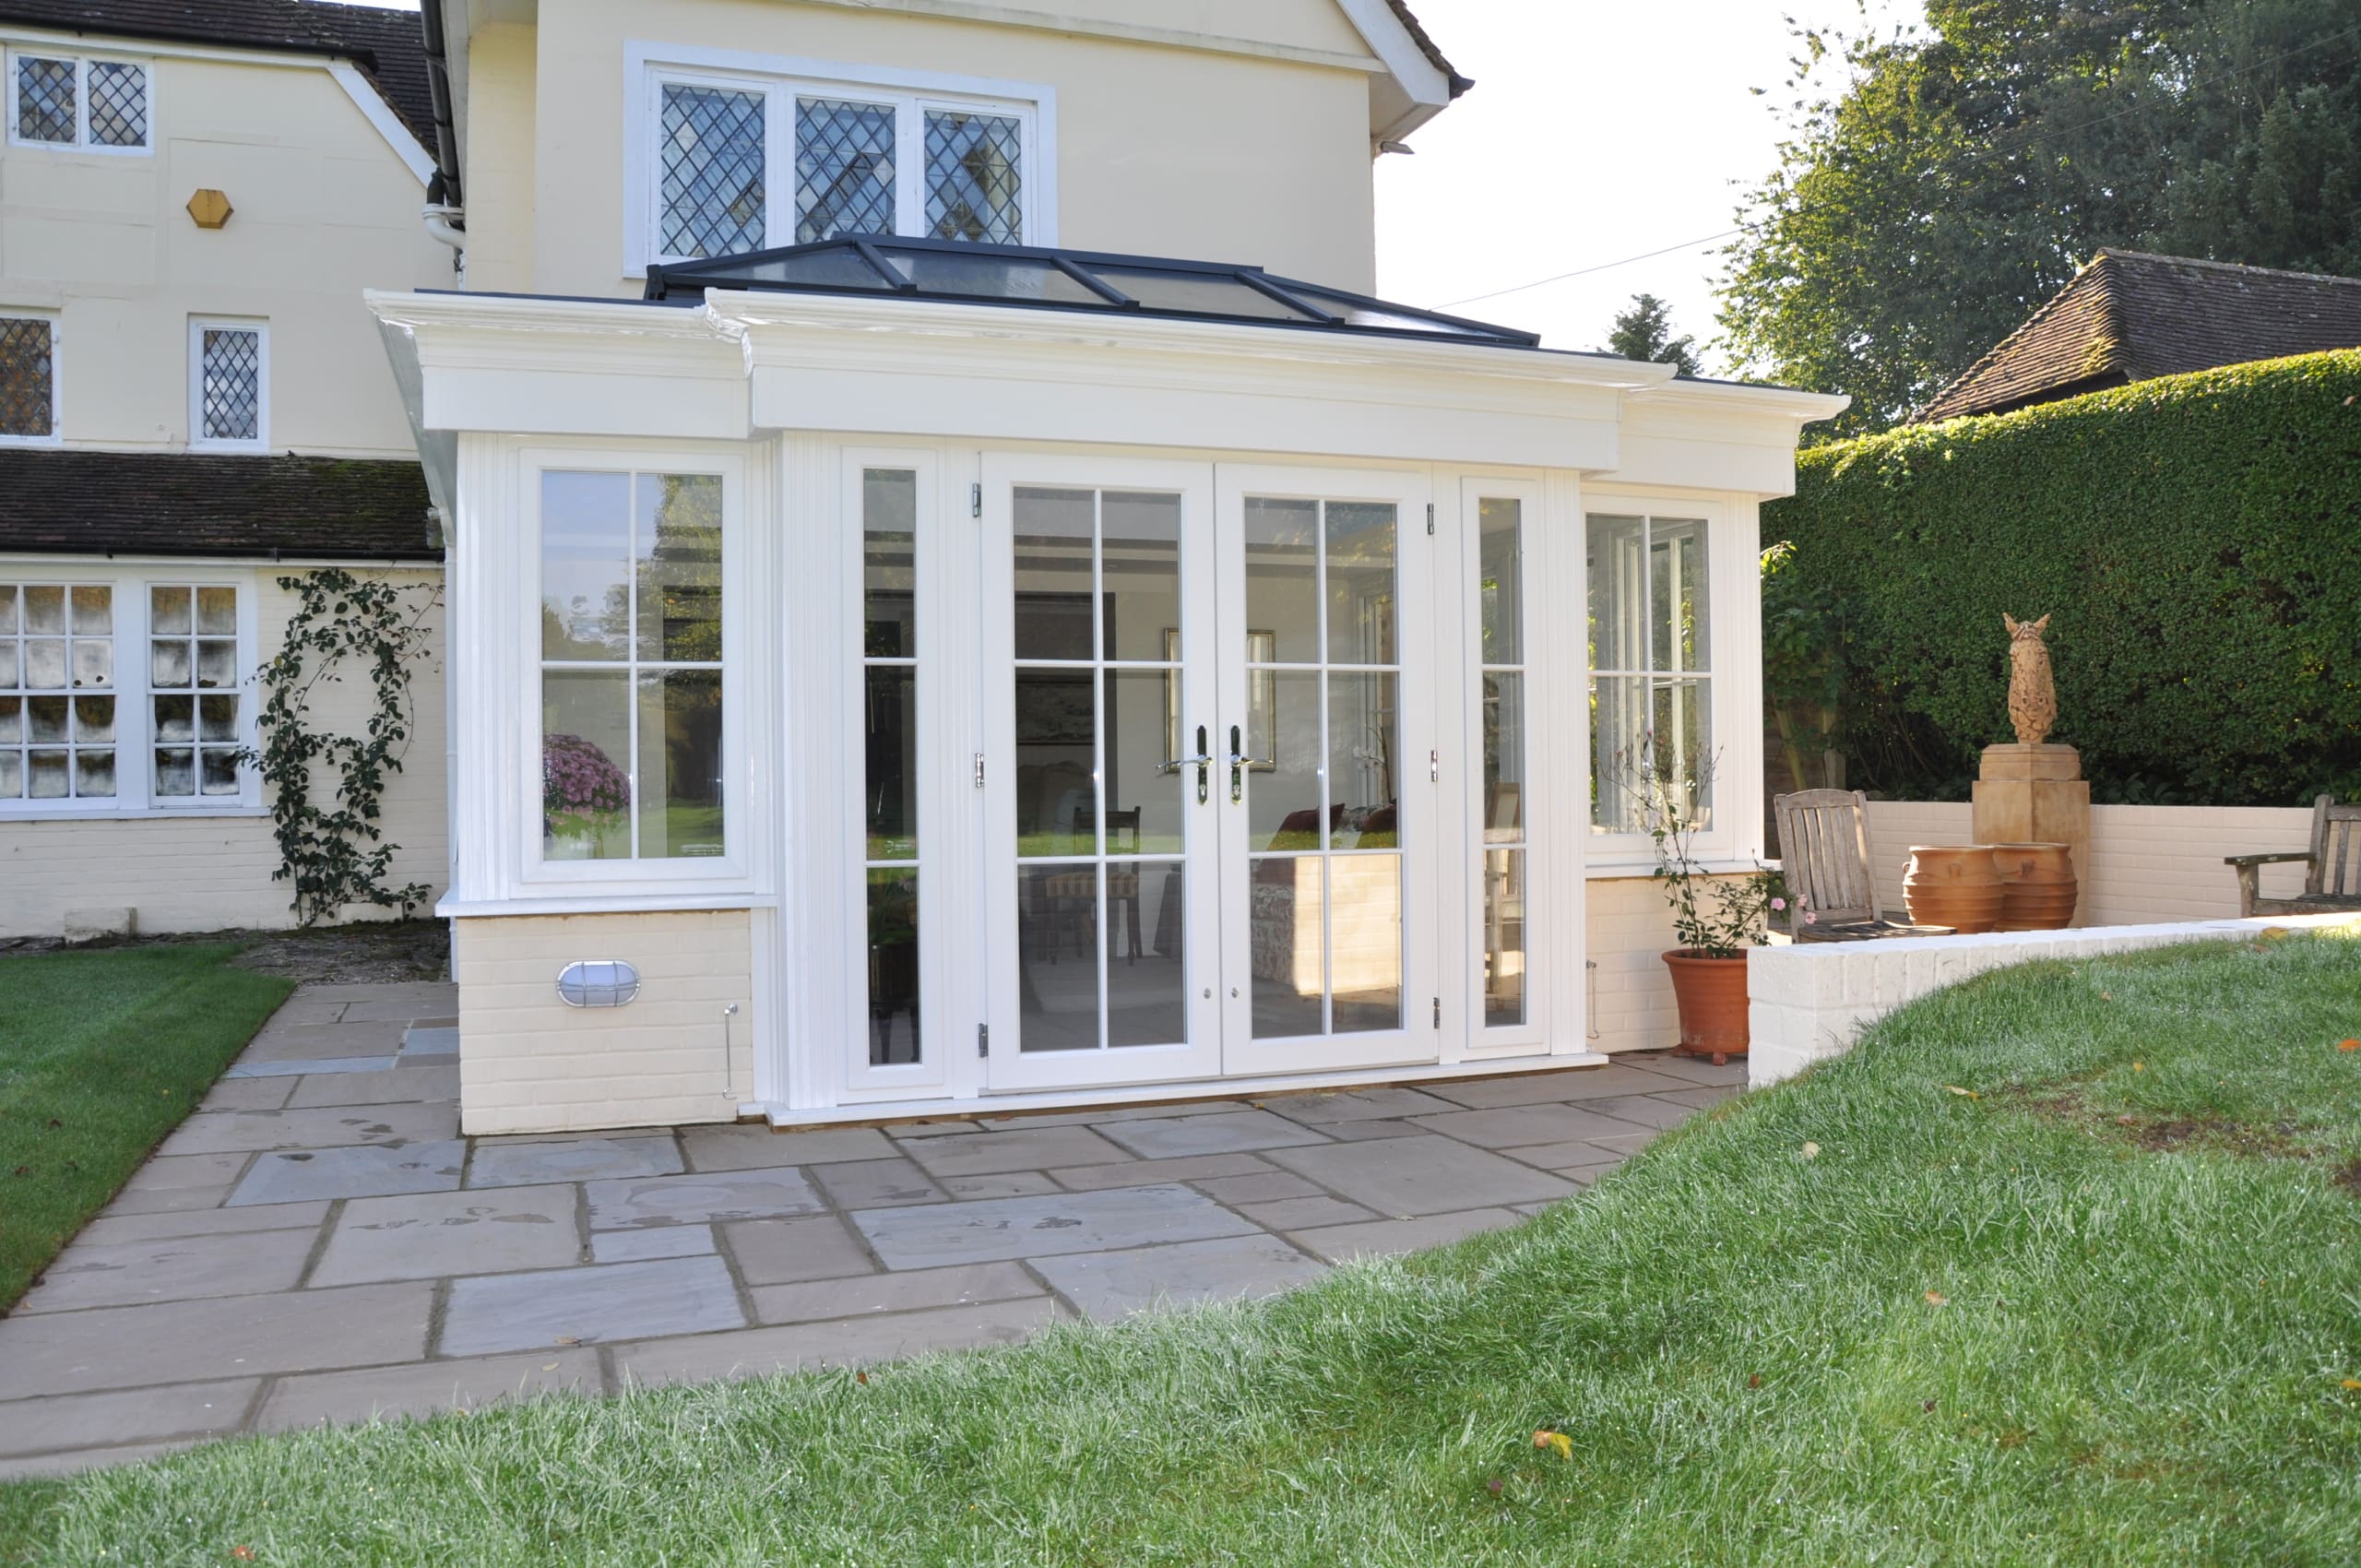 Orangery extension with roof lantern and white framework.